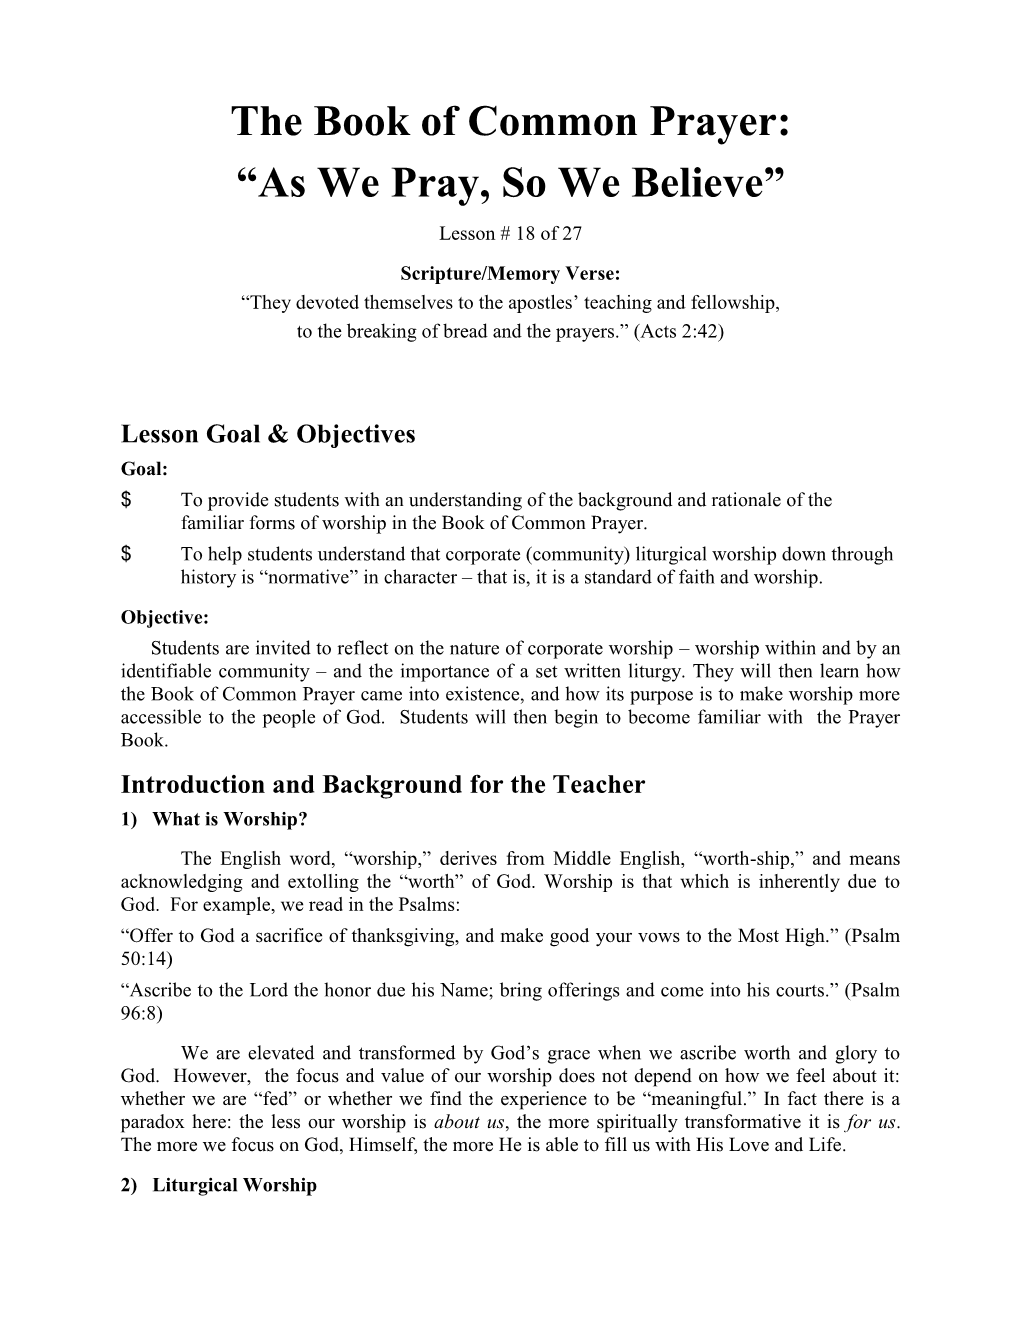 The Book of Common Prayer: “As We Pray, So We Believe”